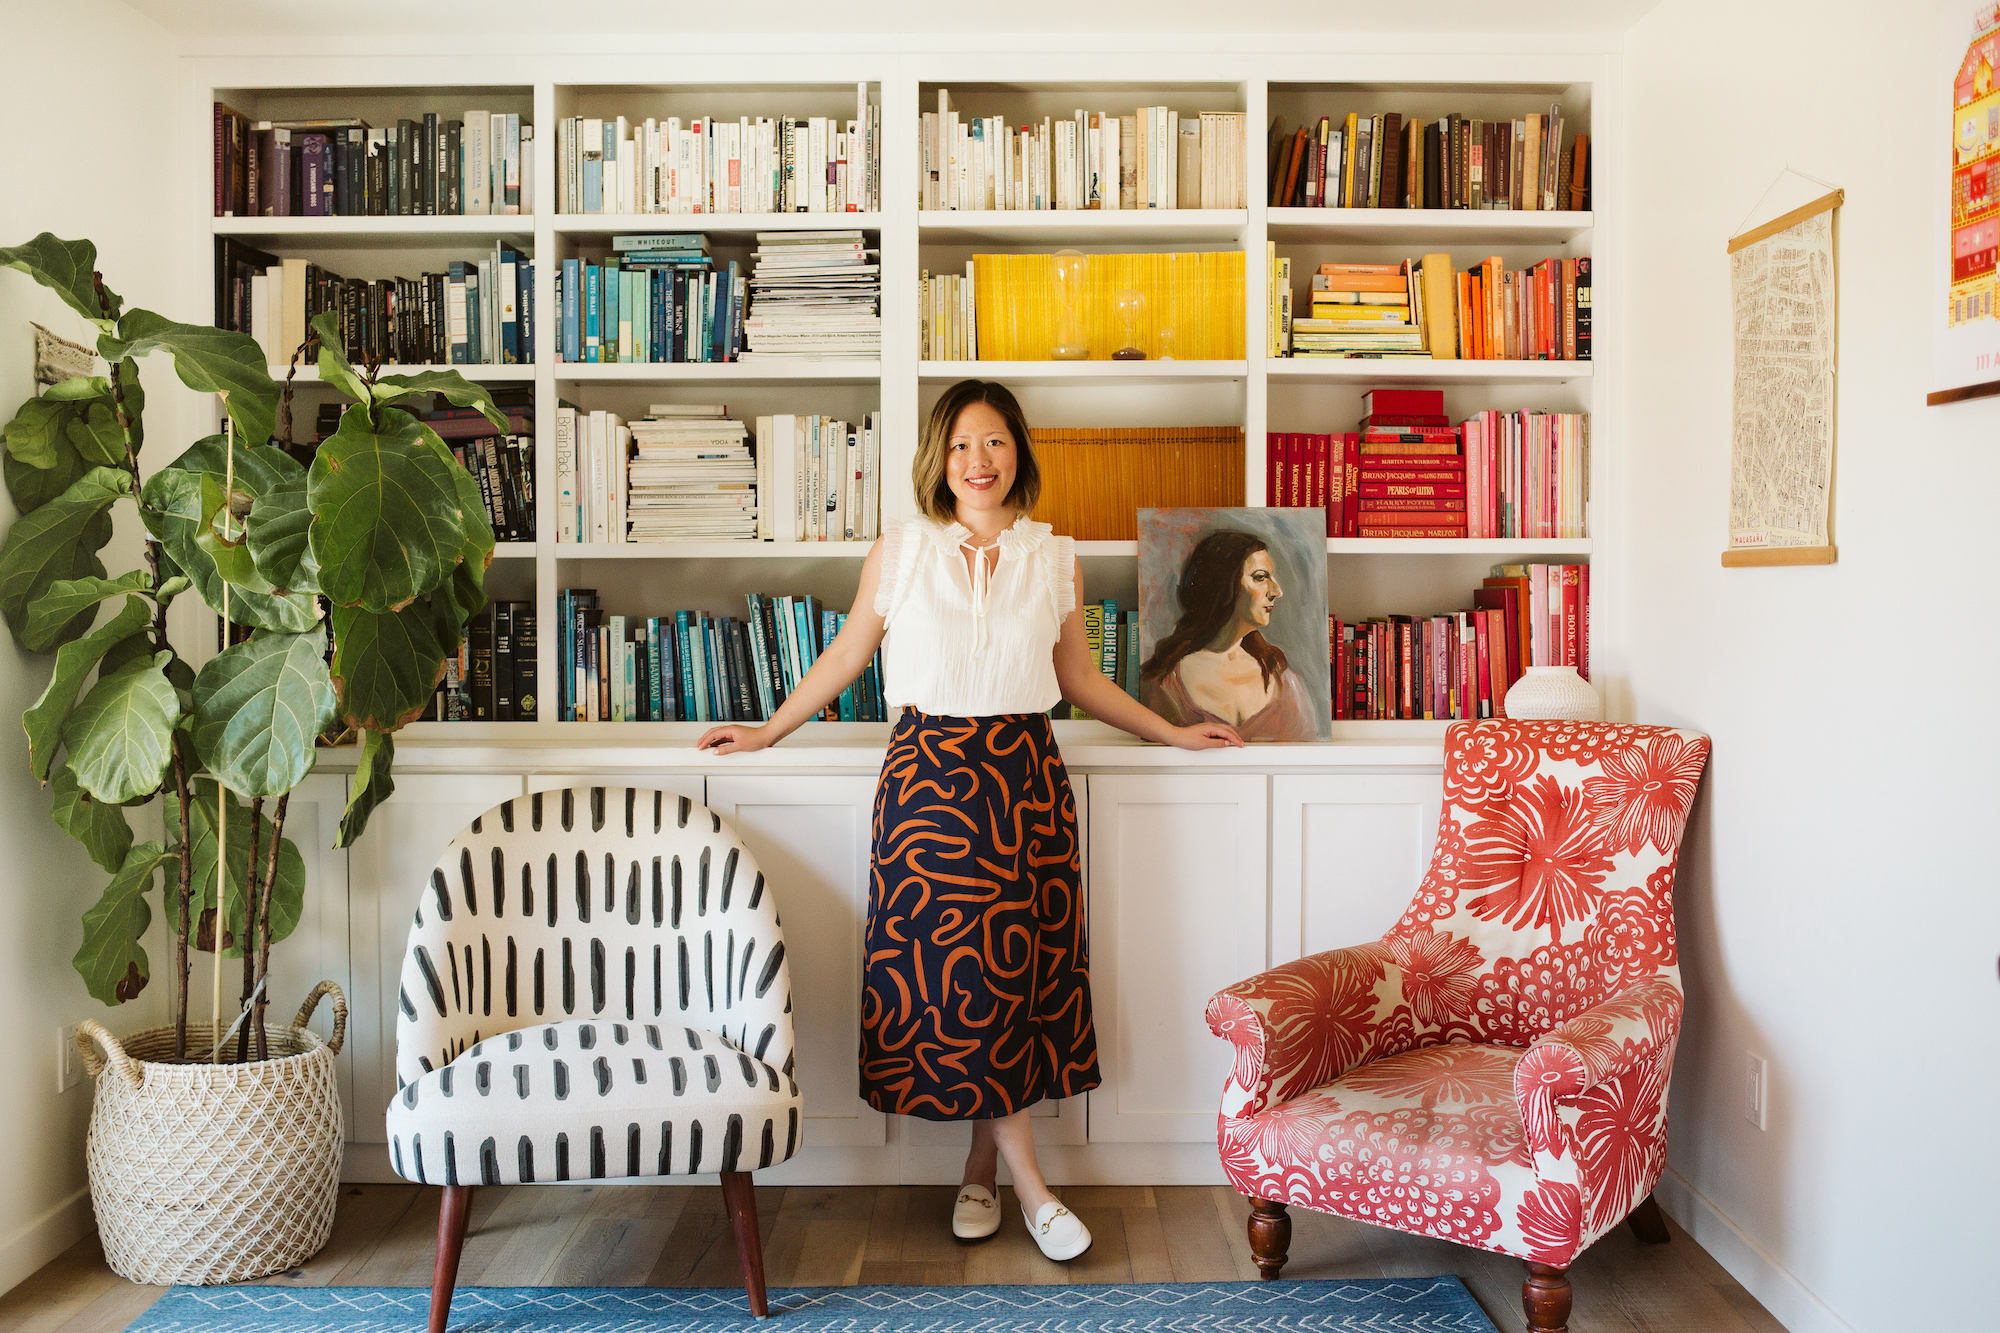 Pink Moon founder Lin Chen started her company after a tough breakup, when she found healing in self-care rituals.